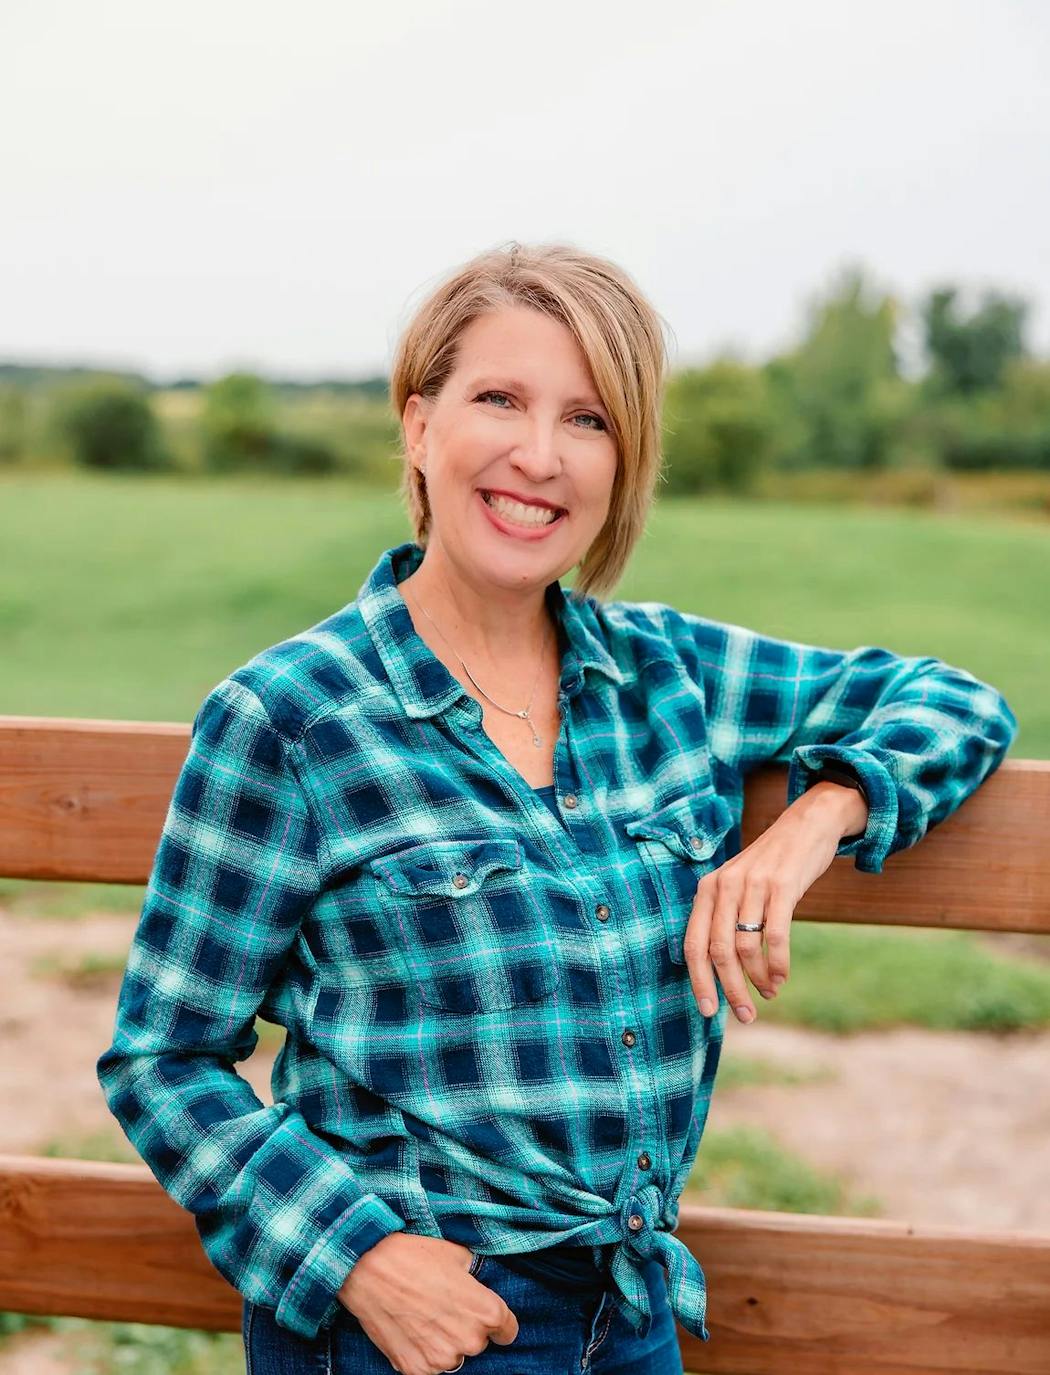 Monica McConkey grew up on her family’s farm in northwest Minnesota and became a state-funded rural mental health specialist for farmers and ranchers in 2019.